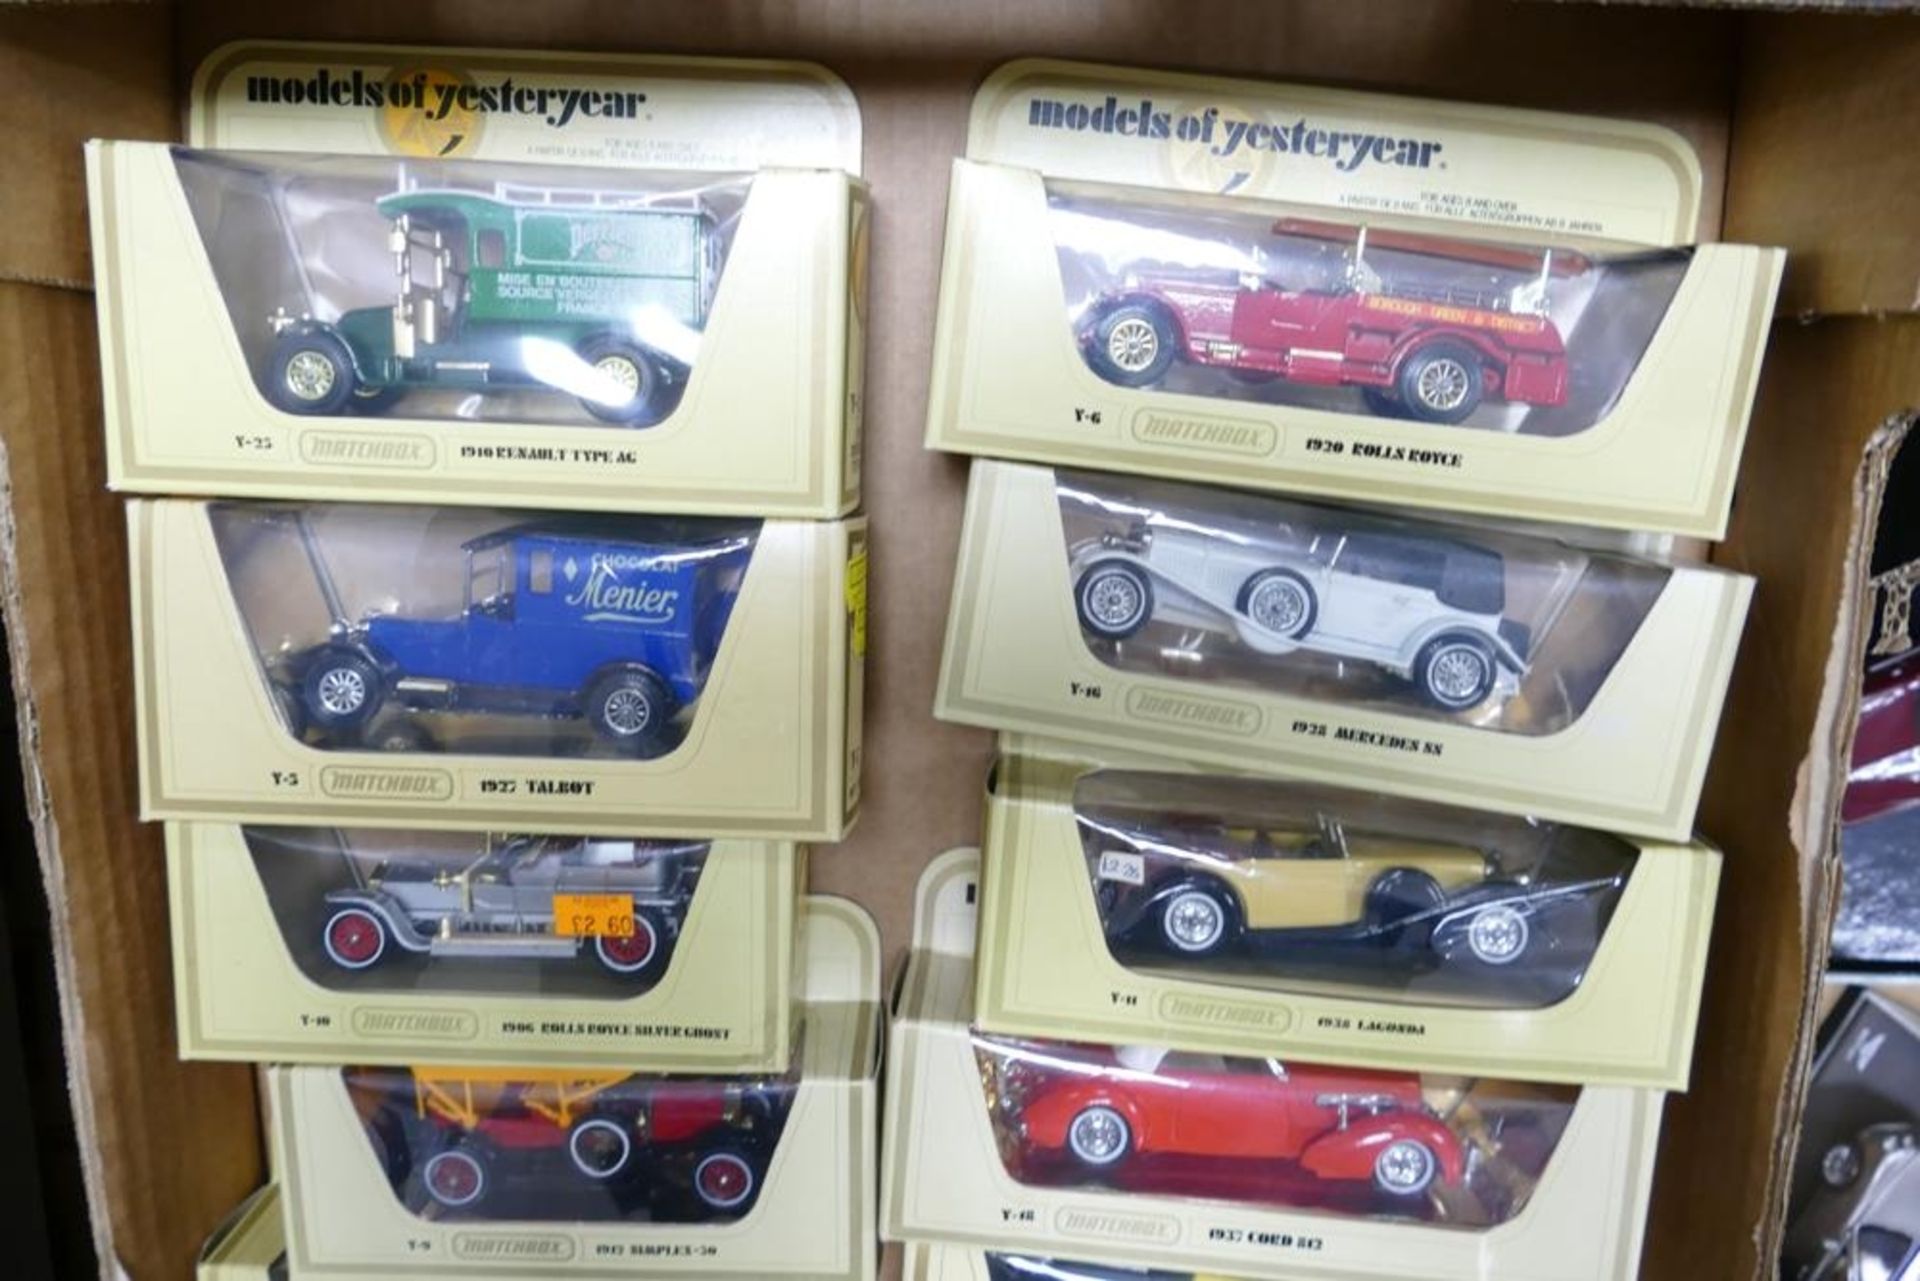 A collection of Boxed Matchbox Models of Yesteryear Classic Model Toy Cars - Image 4 of 4